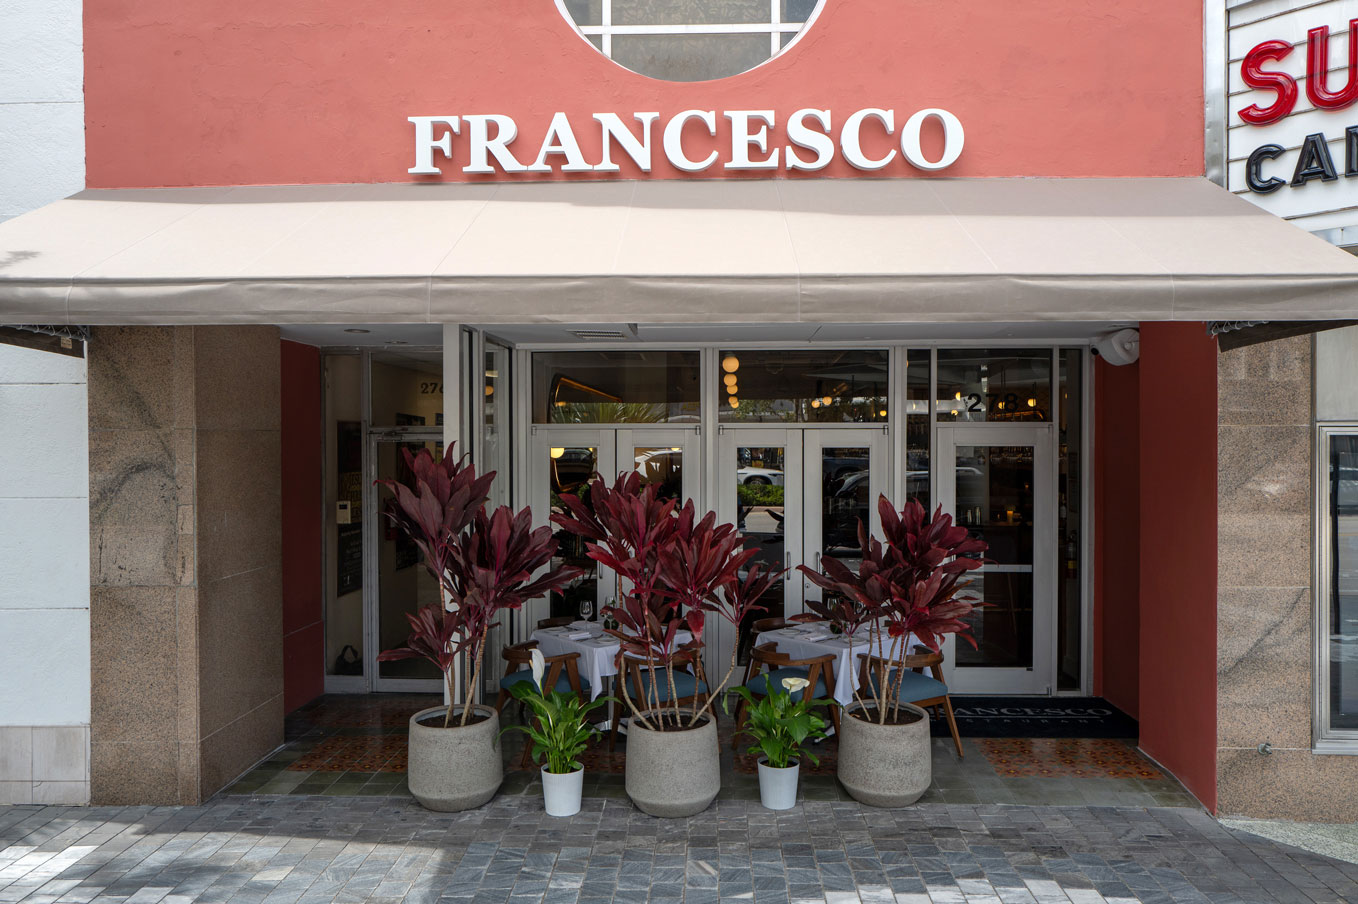 Francesco reopens on Miracle Mile